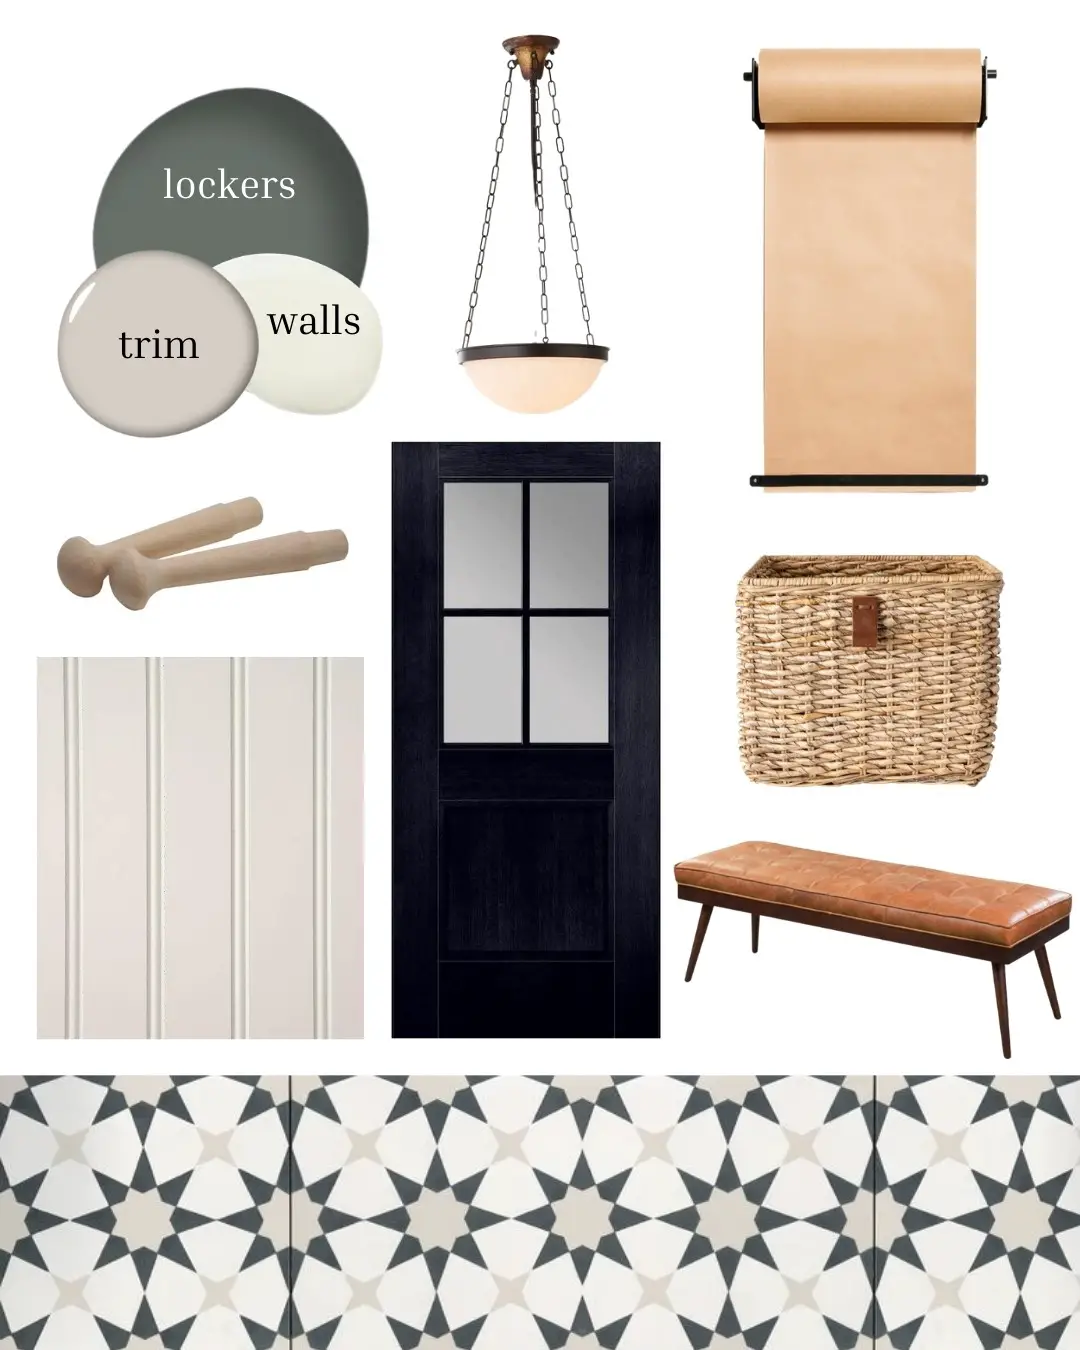 Our Mudroom Mood Board, Plus Three Tips for Designing High-Traffic Areas